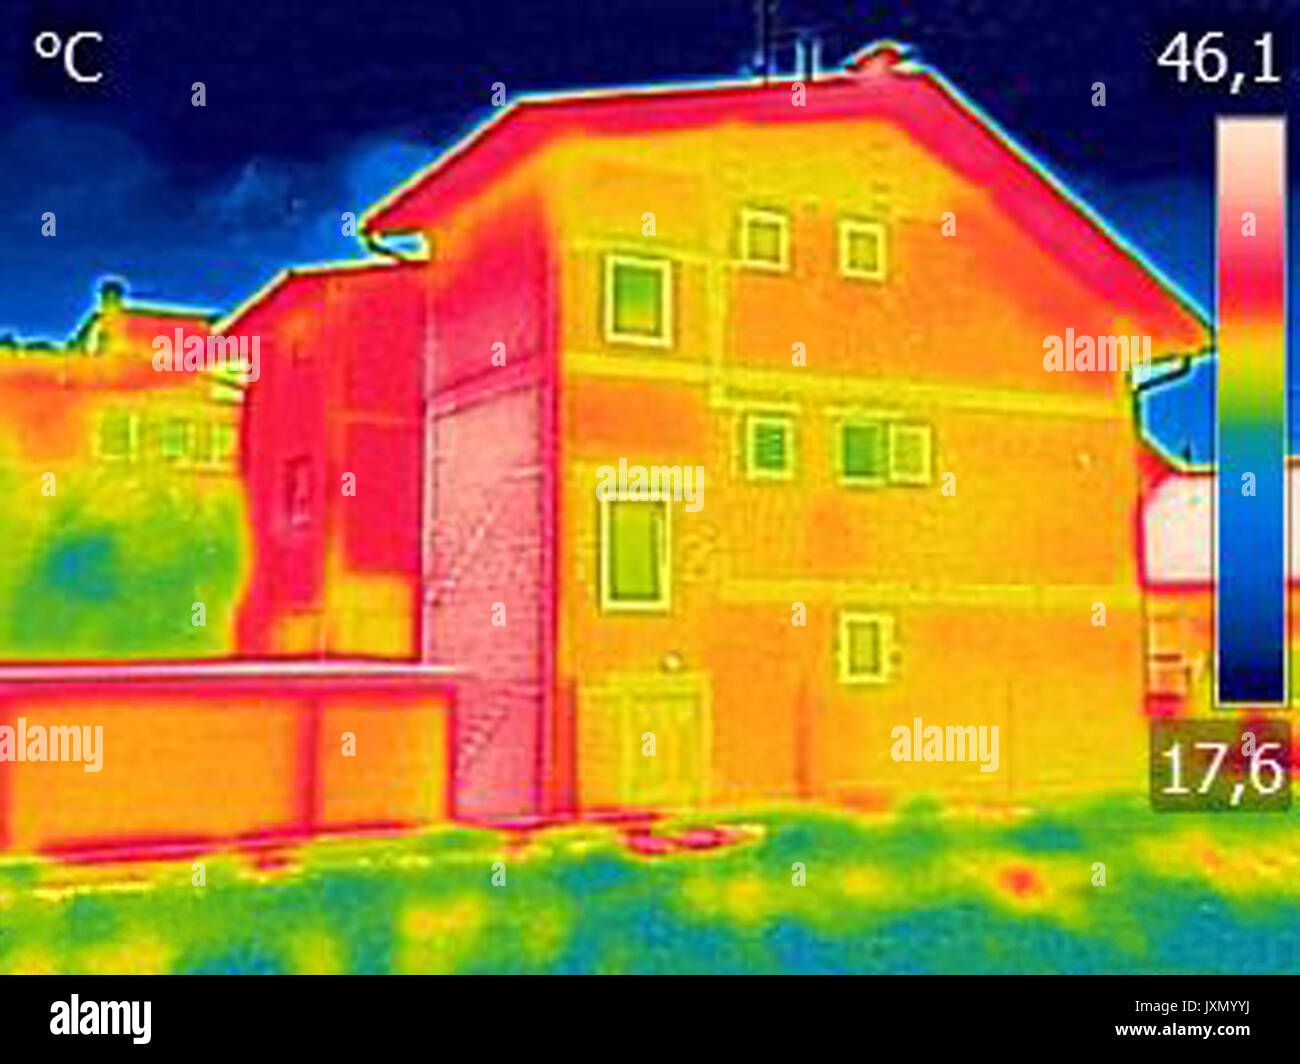 https://c8.alamy.com/comp/JXMYYJ/infrared-thermovision-image-showing-lack-of-thermal-insulation-on-JXMYYJ.jpg